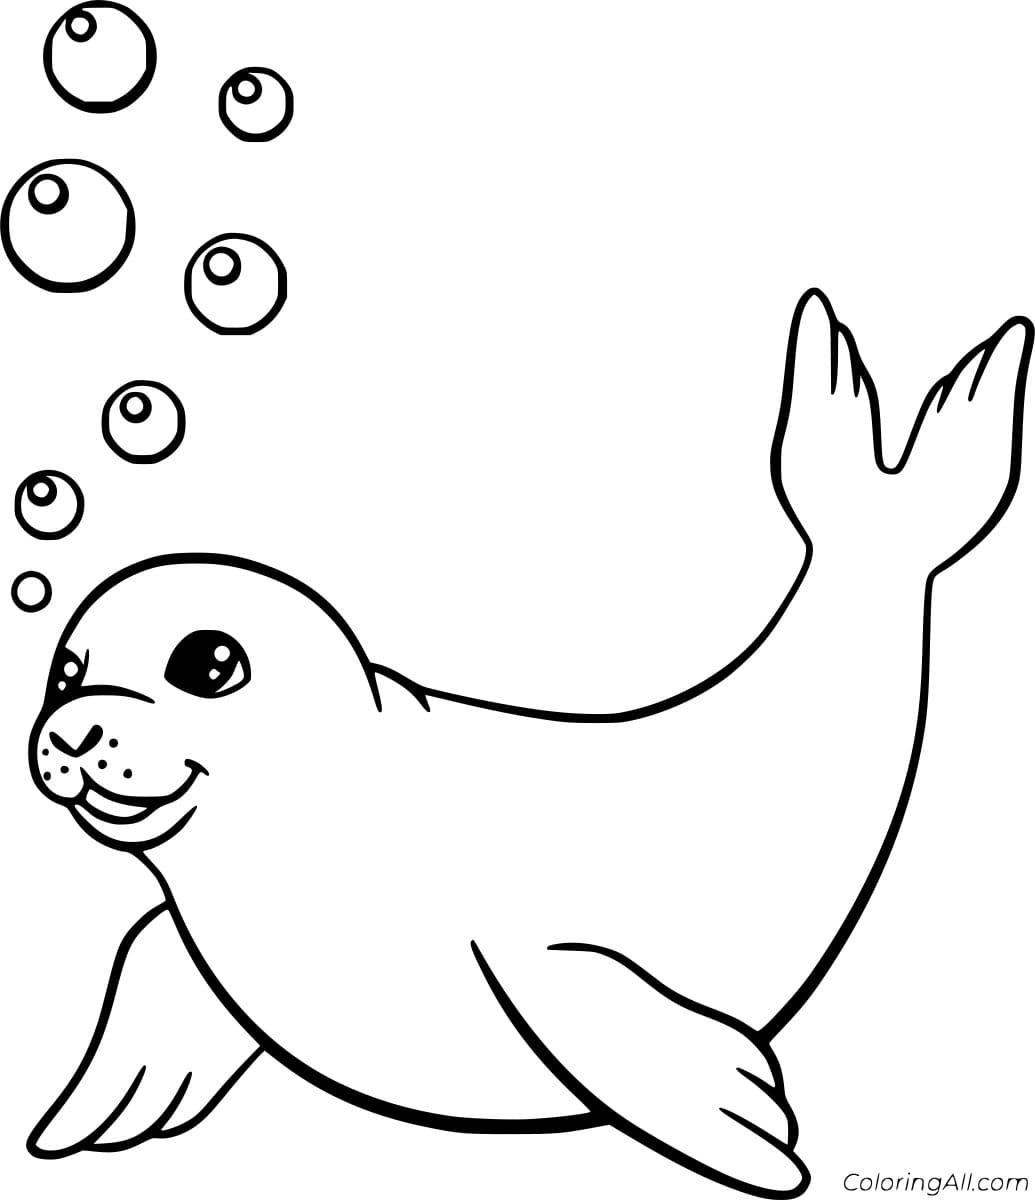 Cute Seal and Bubbles Coloring Page